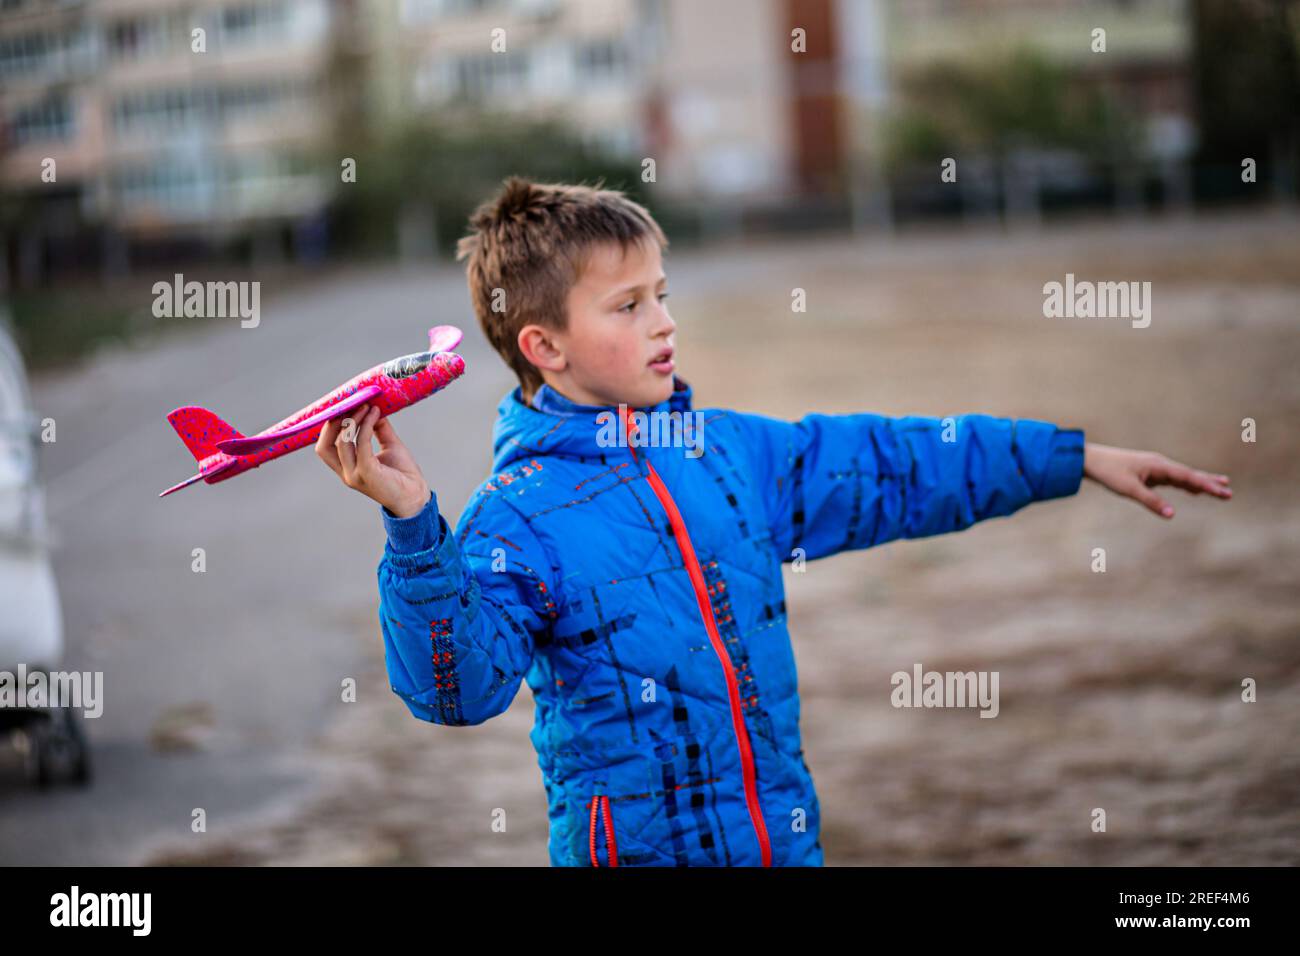 boy delights in launching his toy plane. travel and exploration. Children's development through outdoor games. Stock Photo